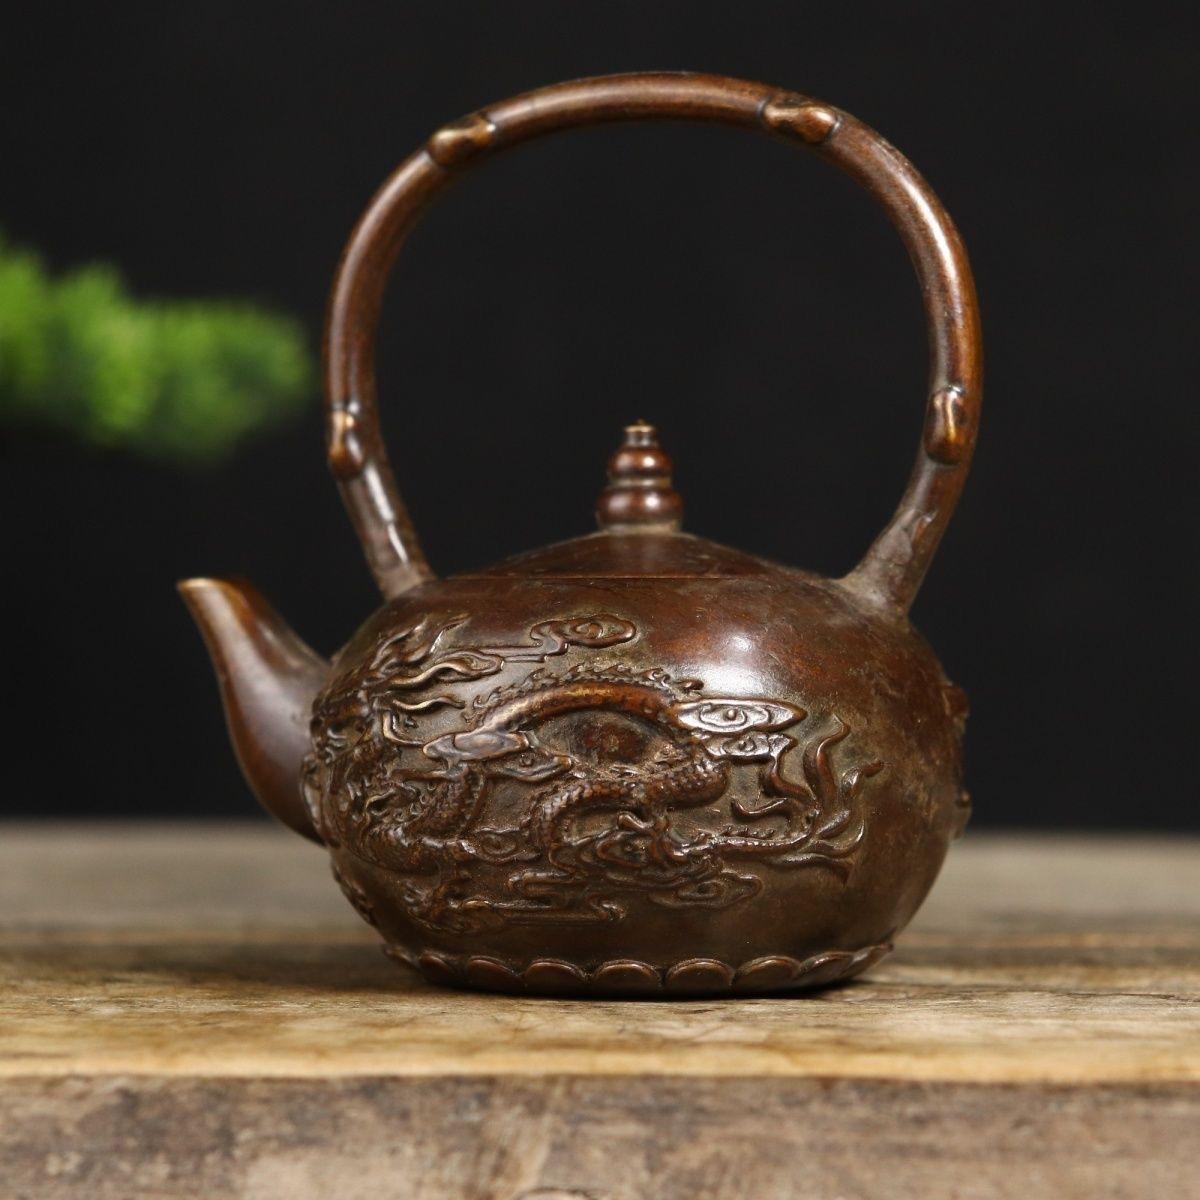 Old collection of this Asian Chinese Bronze Teapot with Dragon and Phoenix, the mark on the bottom Qian Long Yu Zhi means it was made by government in Qing dynasty Qian Long period, unique style and exquisitely carved, good for decoration and